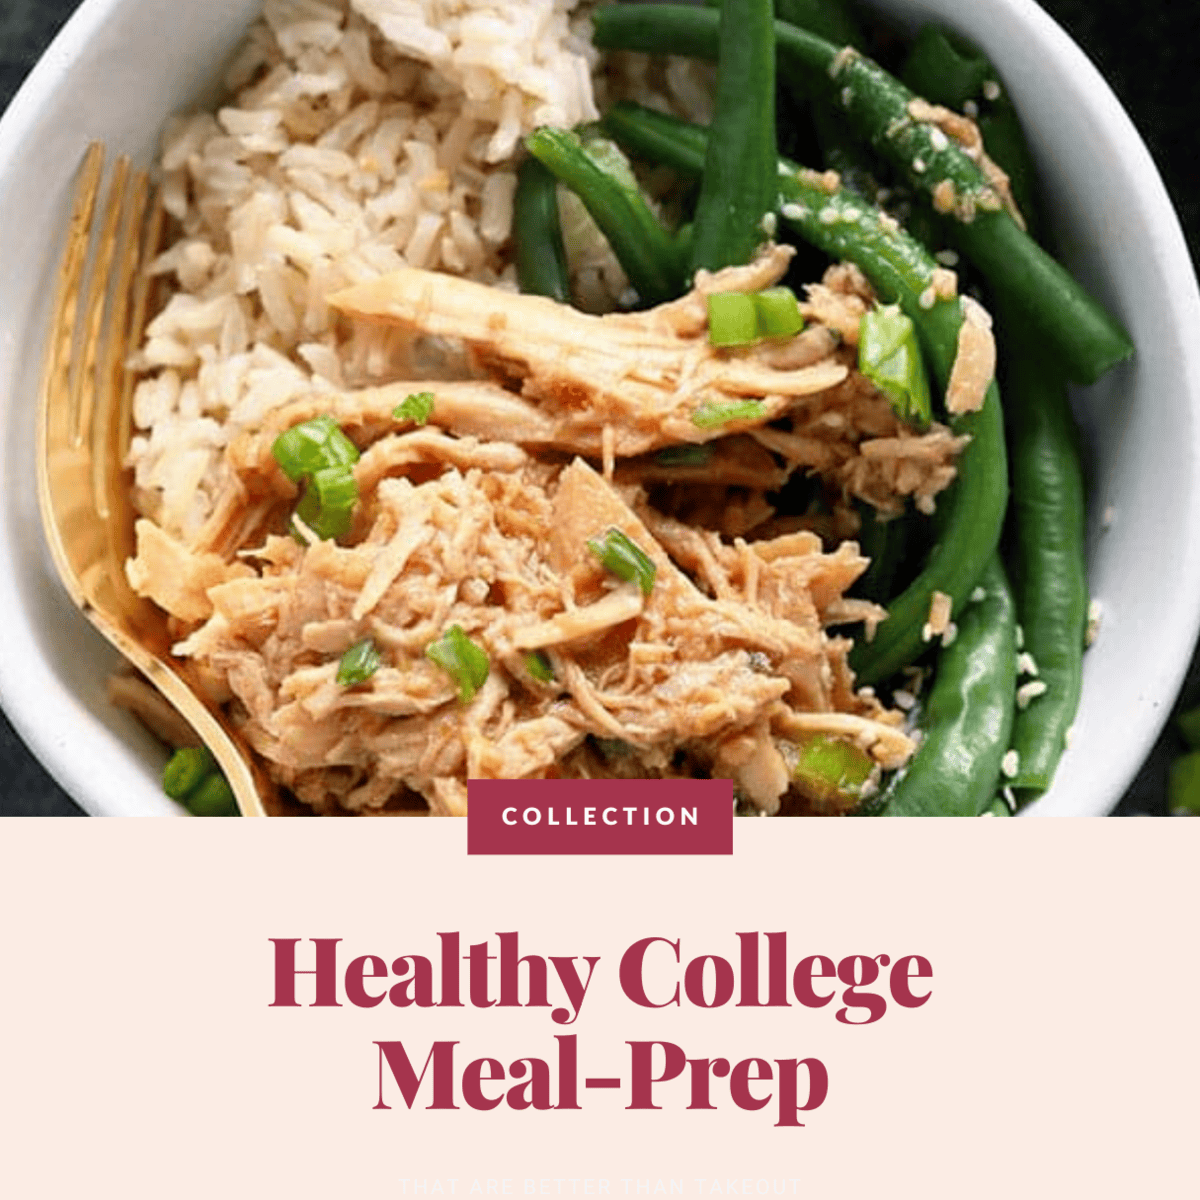 Healthy College Meals (Budget-Friendly and Meal-Prep!)